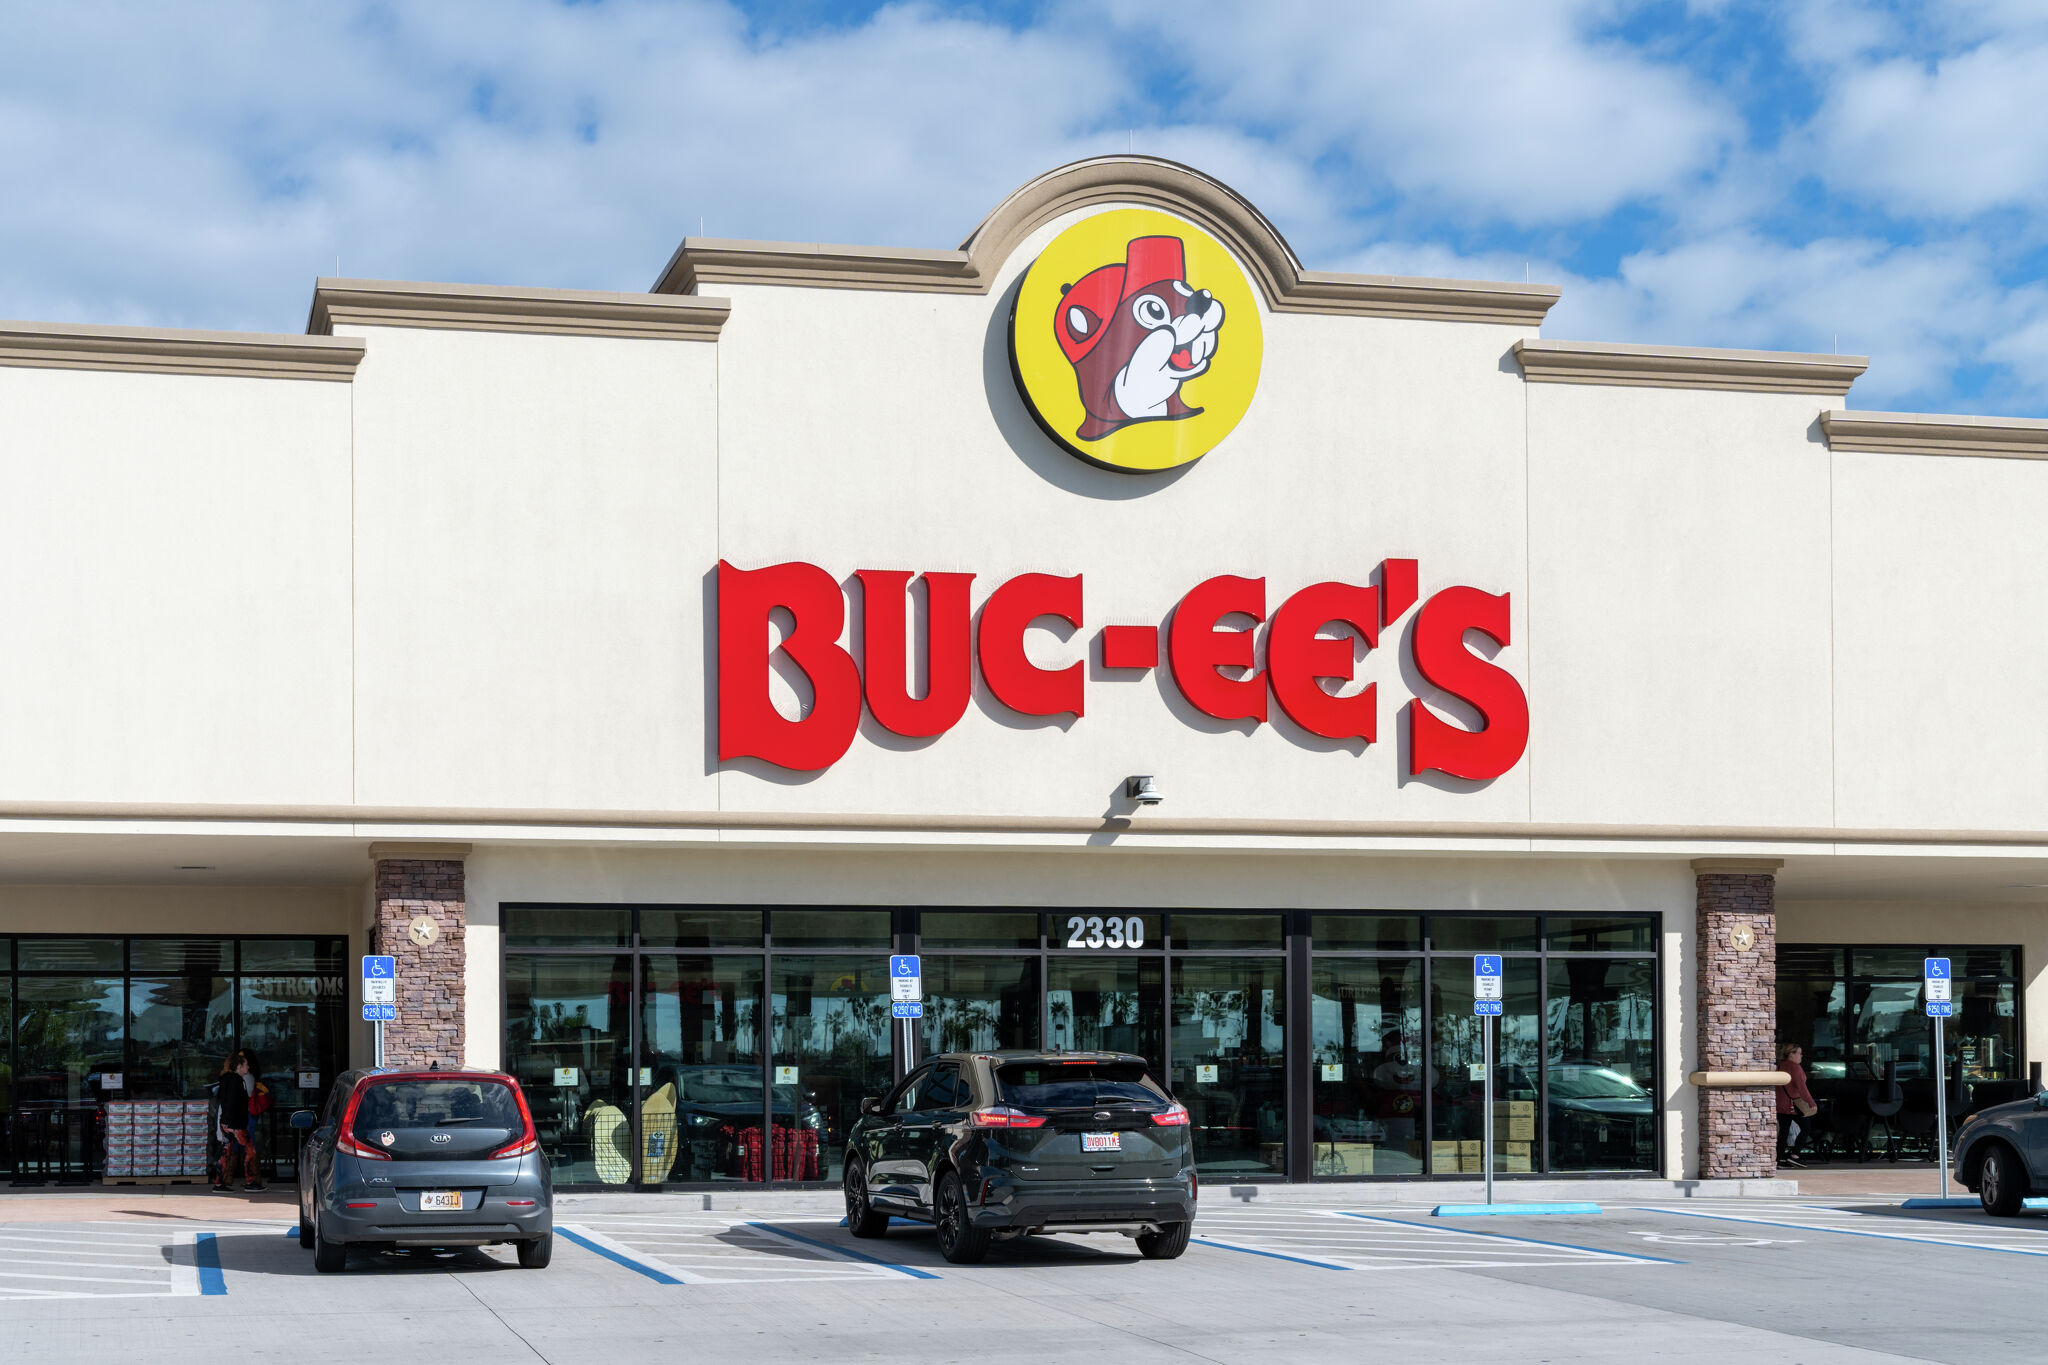 Springfield soon to be home to Missouri's first Bucees